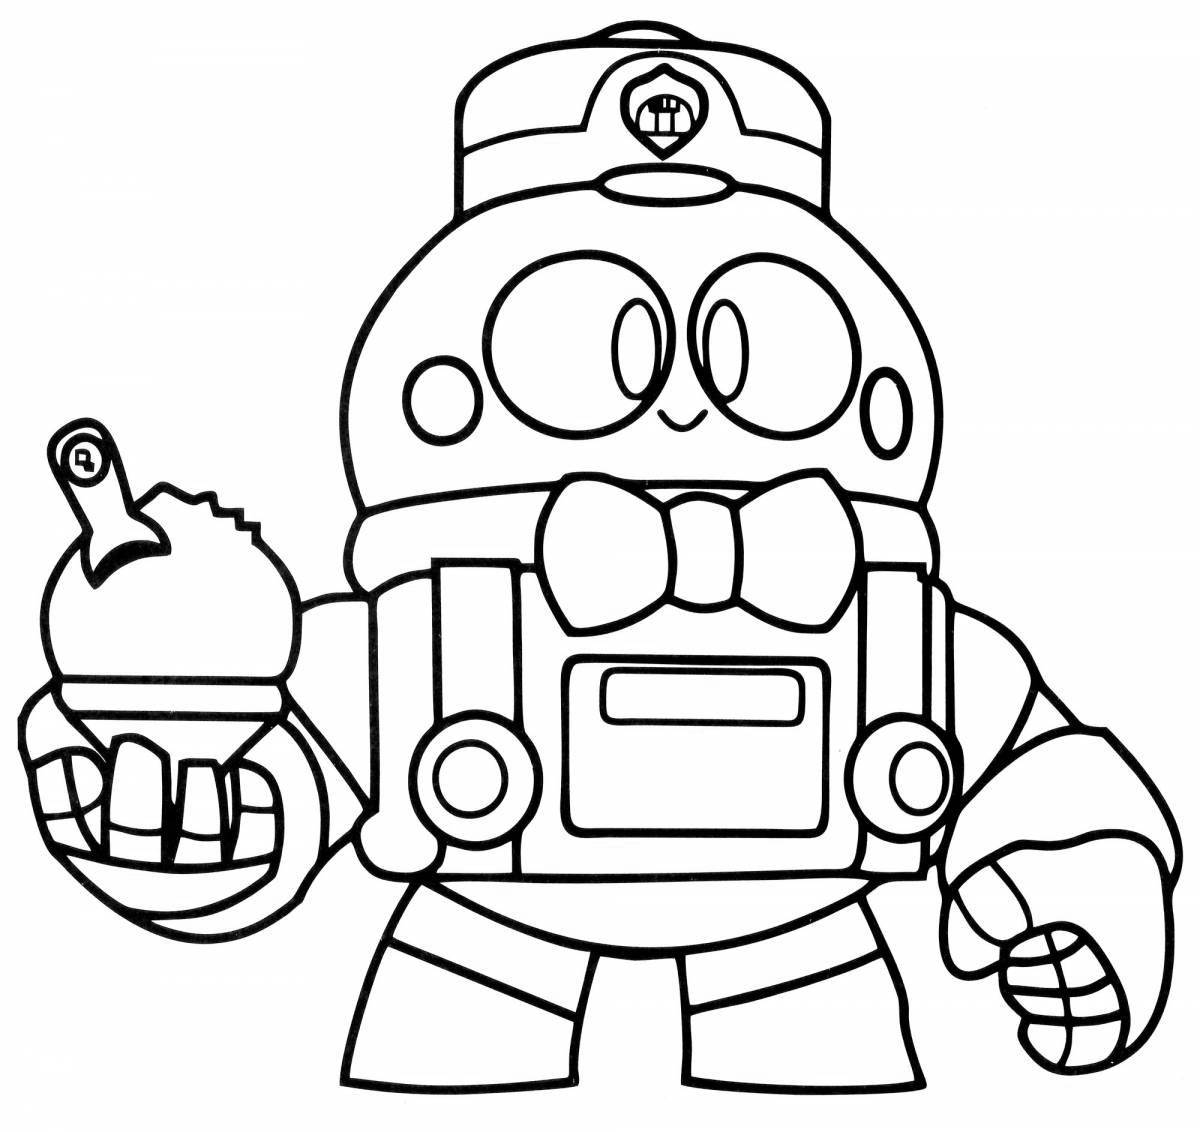 Awesome bravo stars feng coloring page